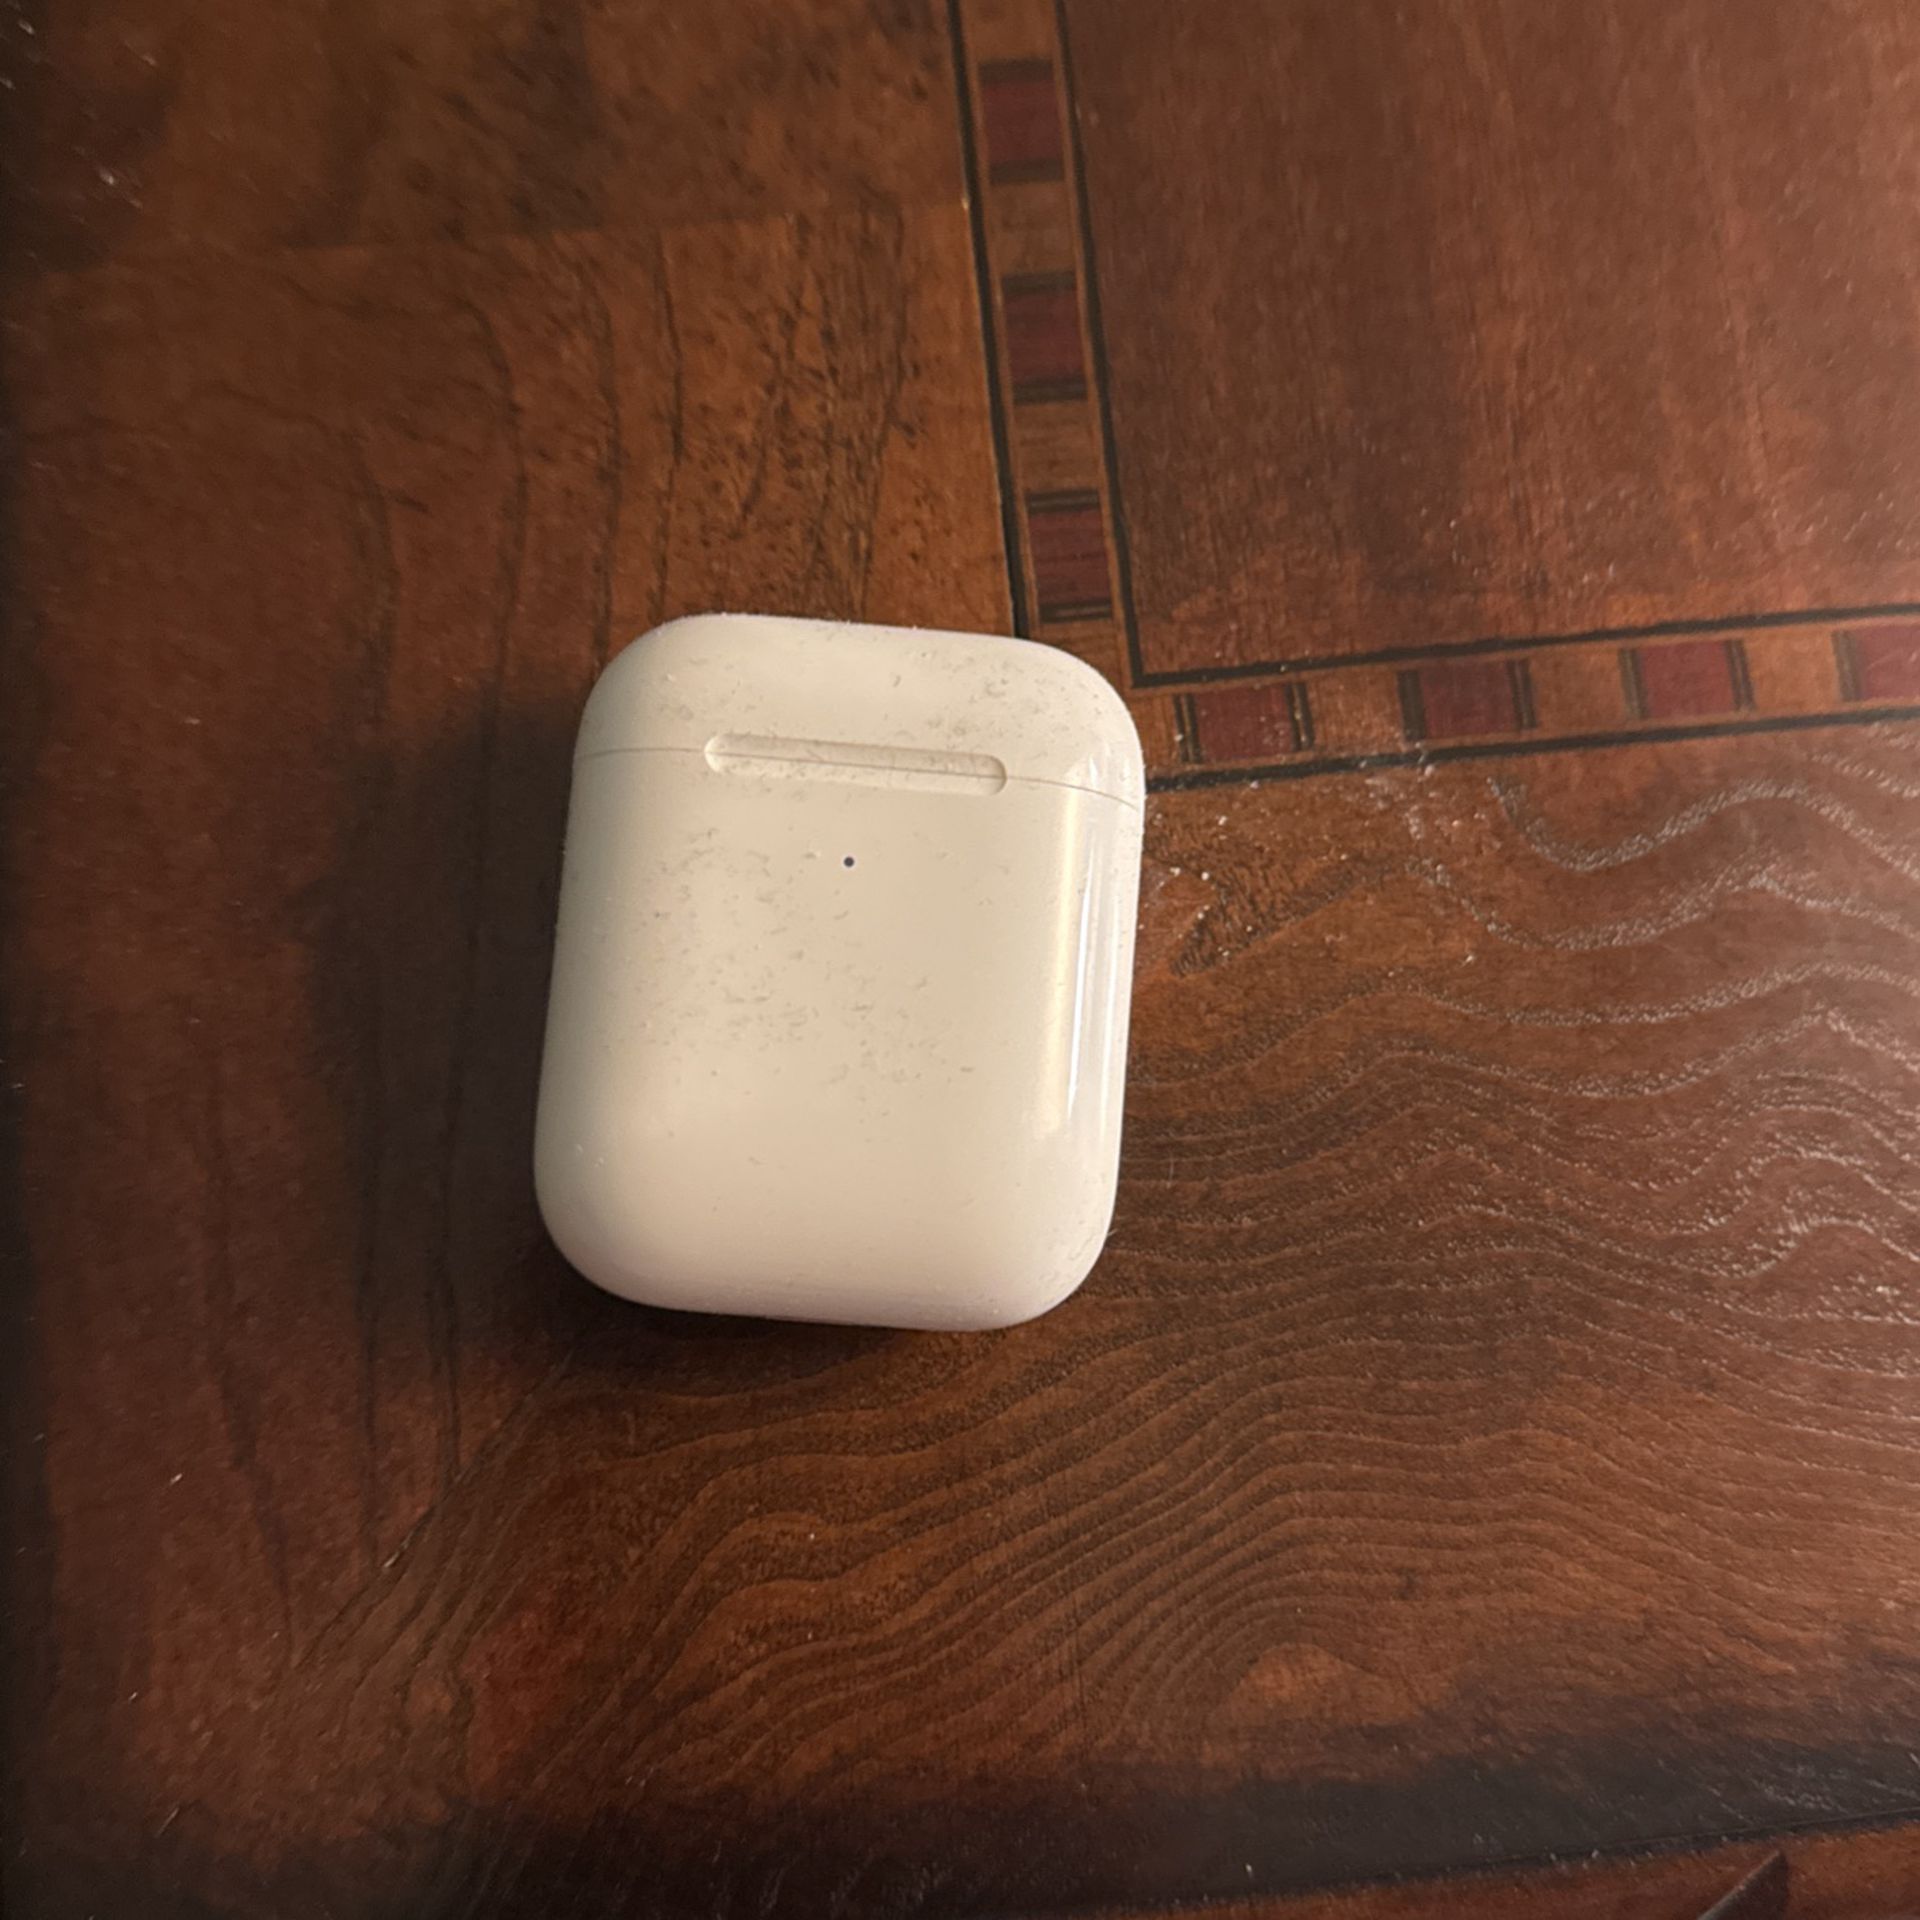 AirPods 2 Generation